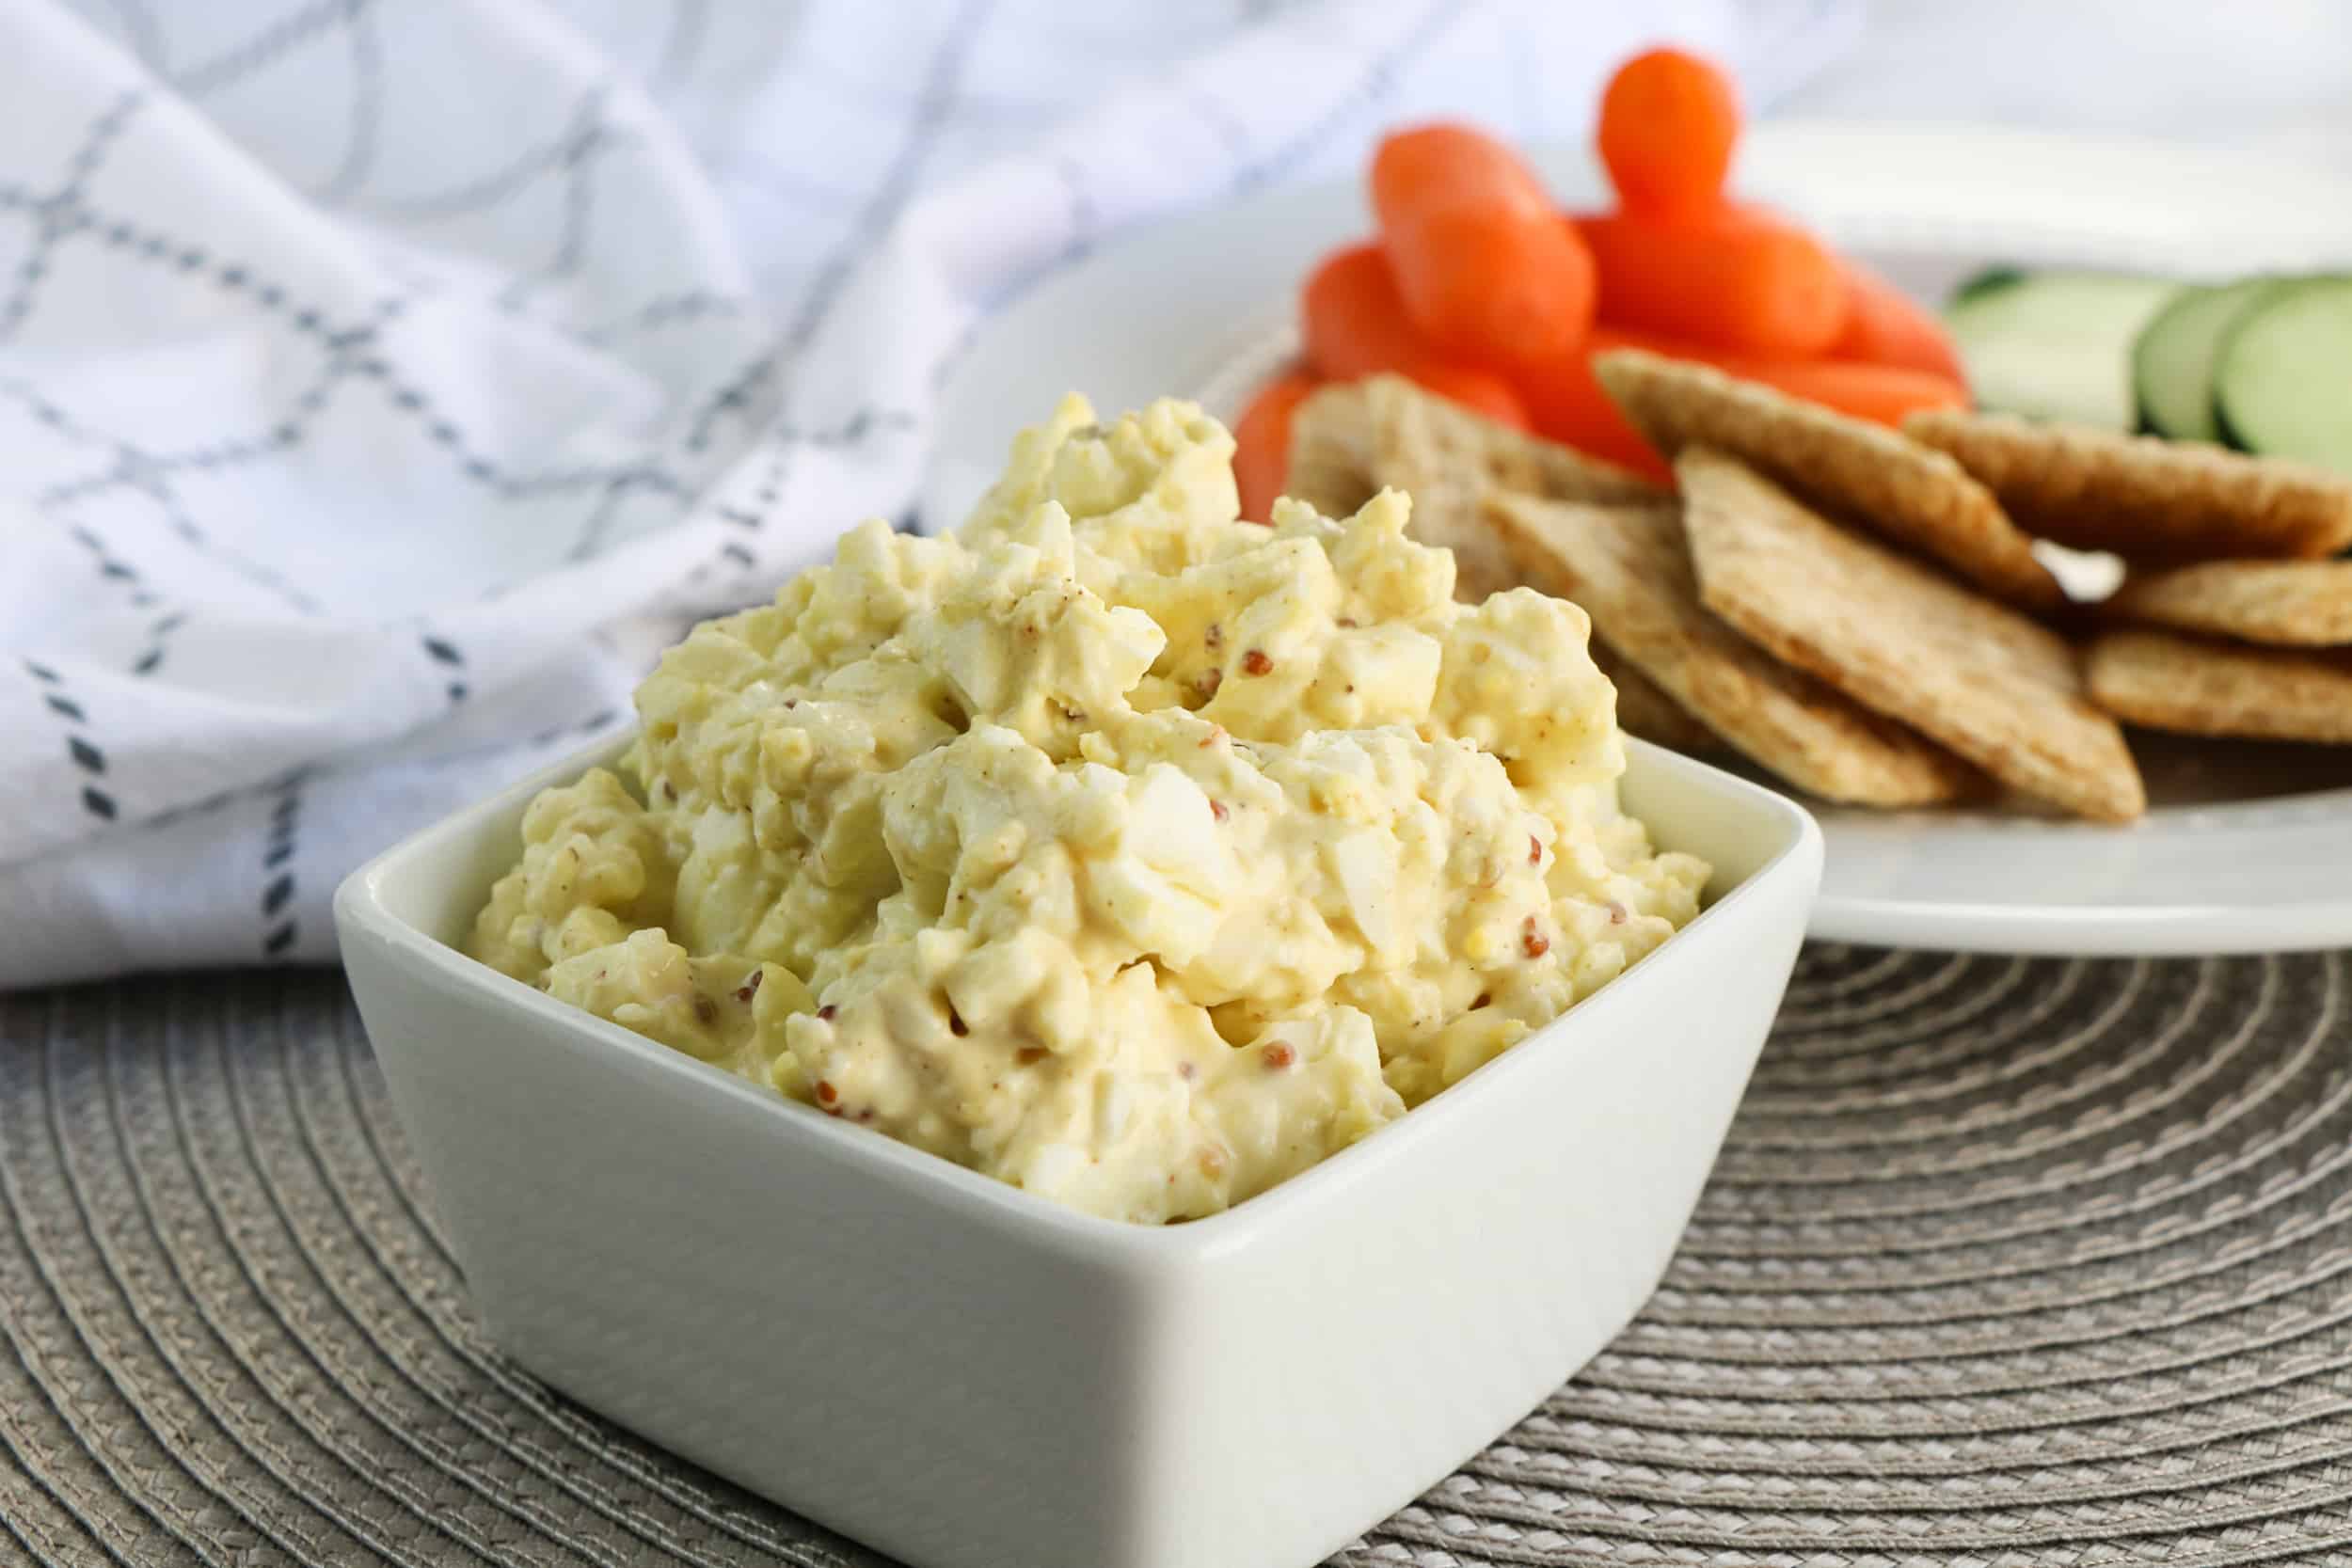 Best (and easy!) homemade egg salad recipe